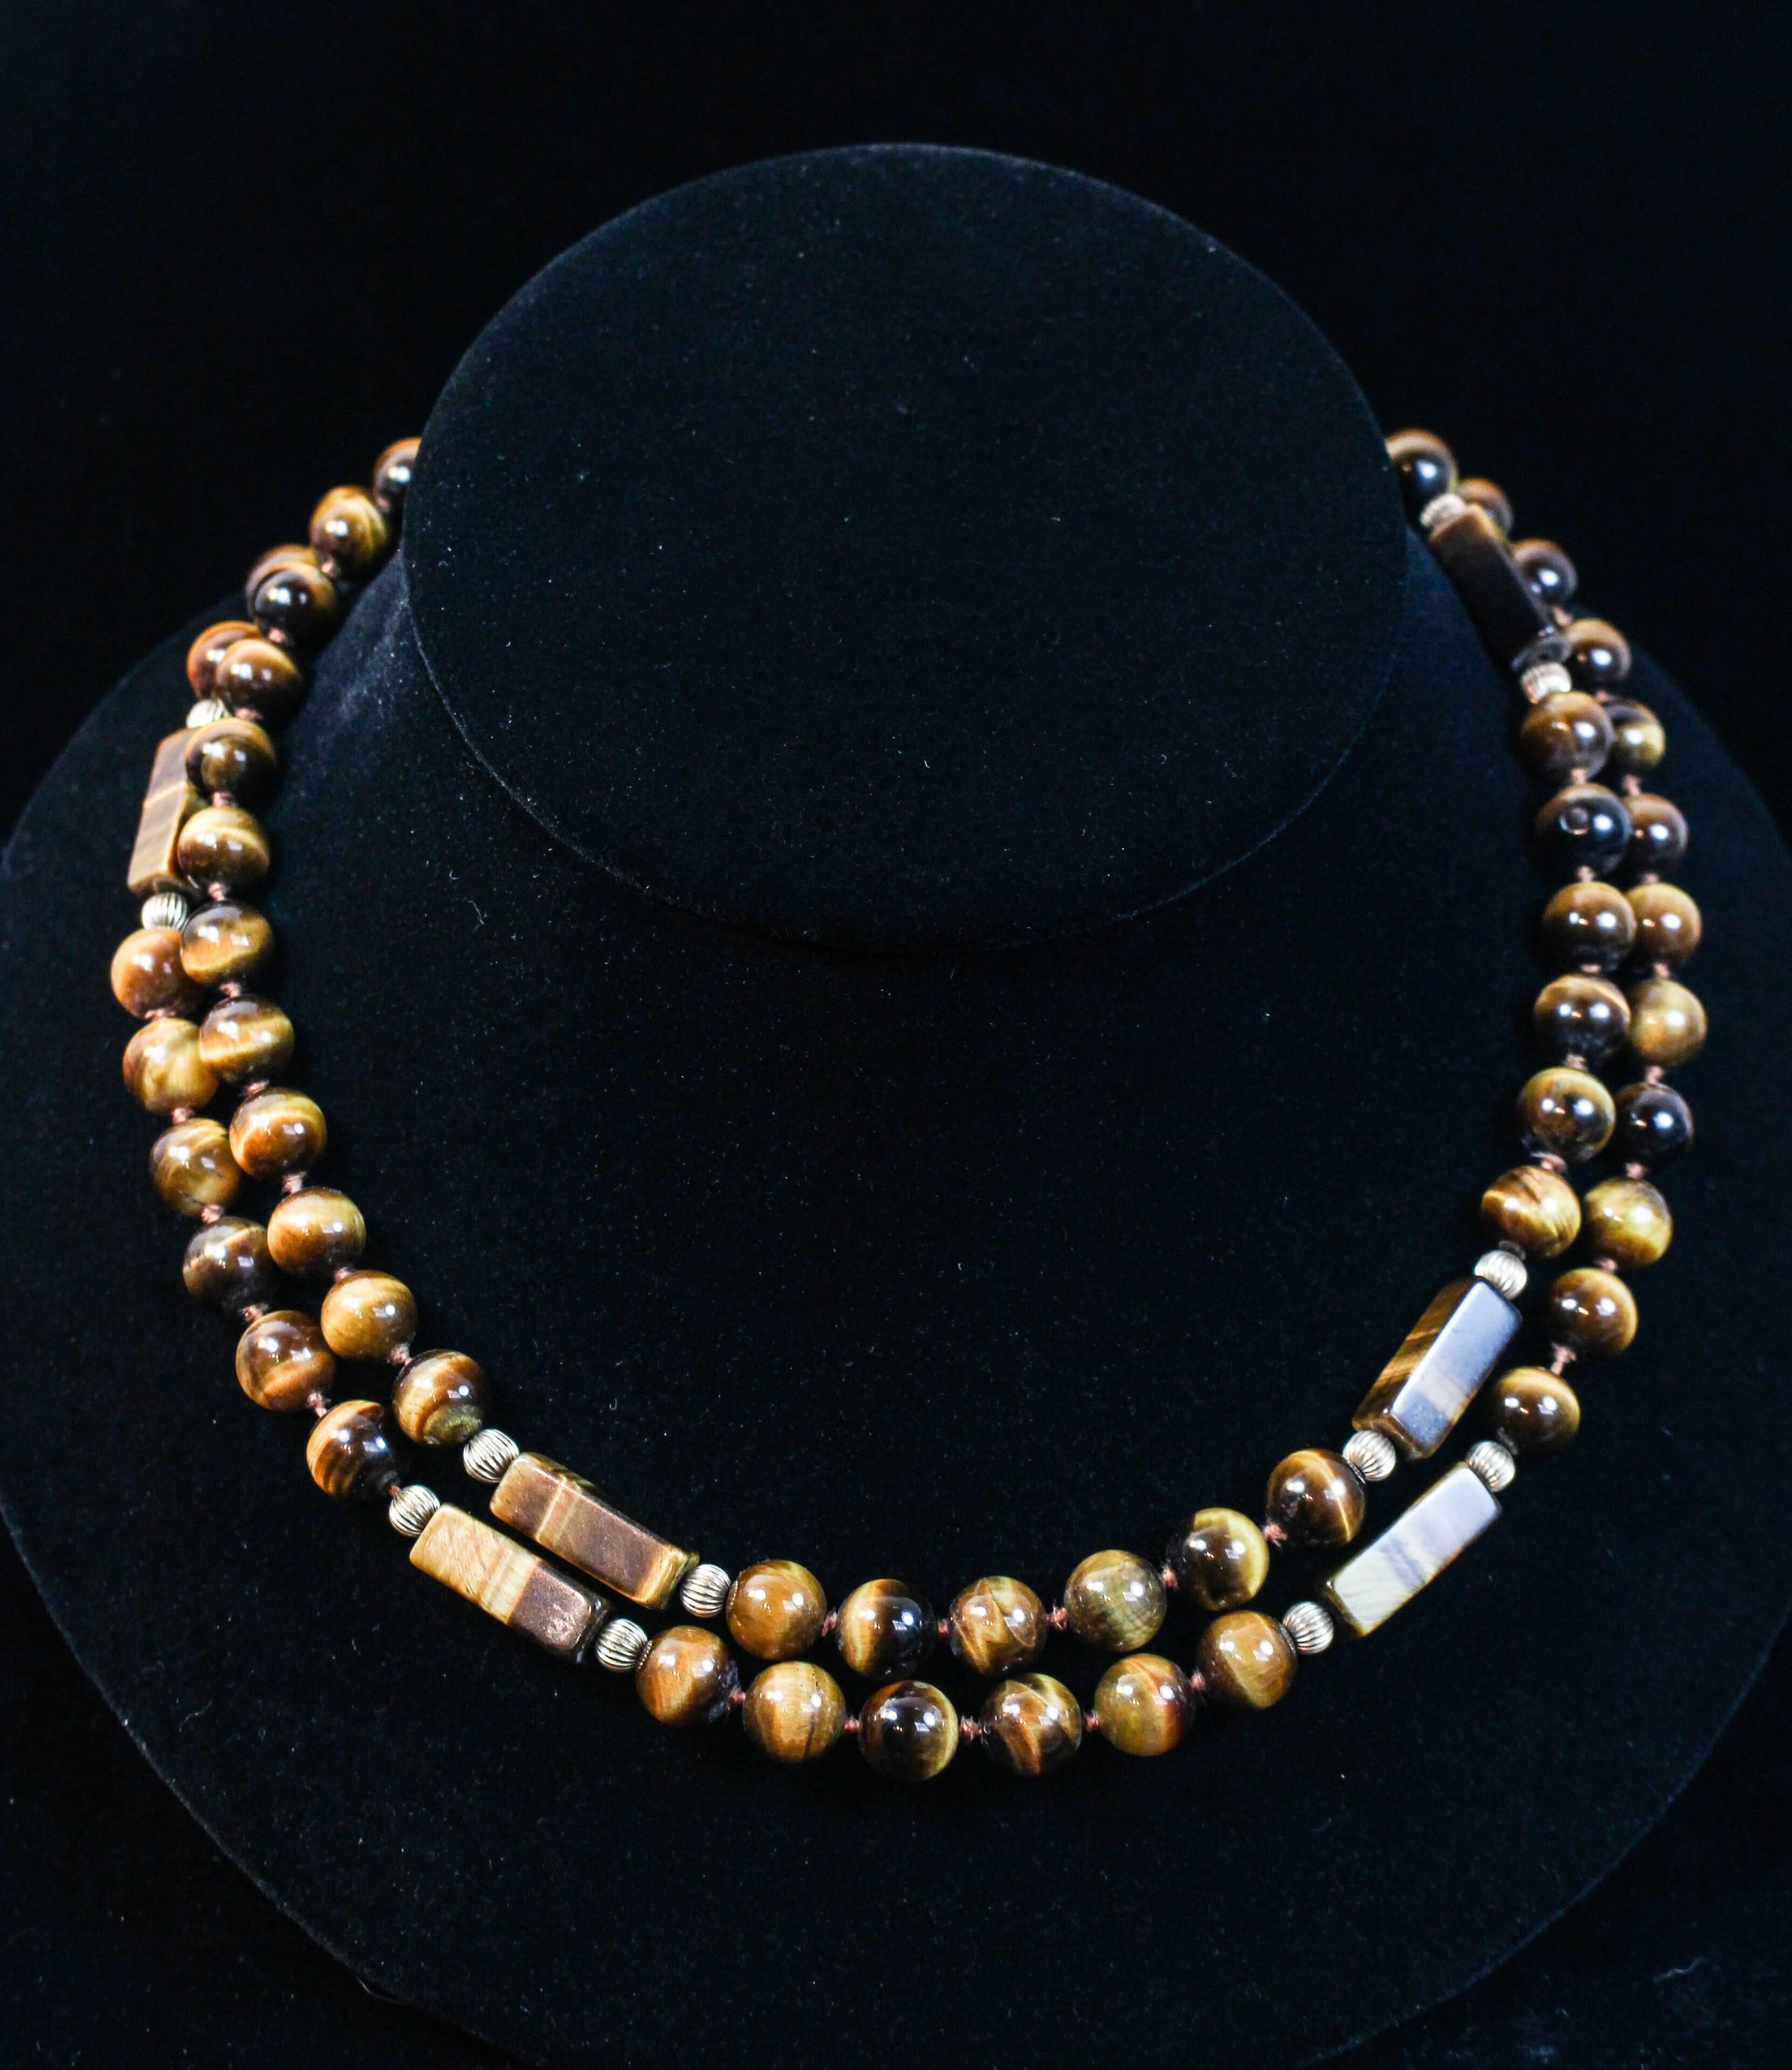 This necklace is composed of Tiger's eye round and rectangular beads, with 14KT gold beads an closure. Can be styled in a variety of fashions. In excellent condition.

Please feel free to ask any questions you may have, we are happy to assist.